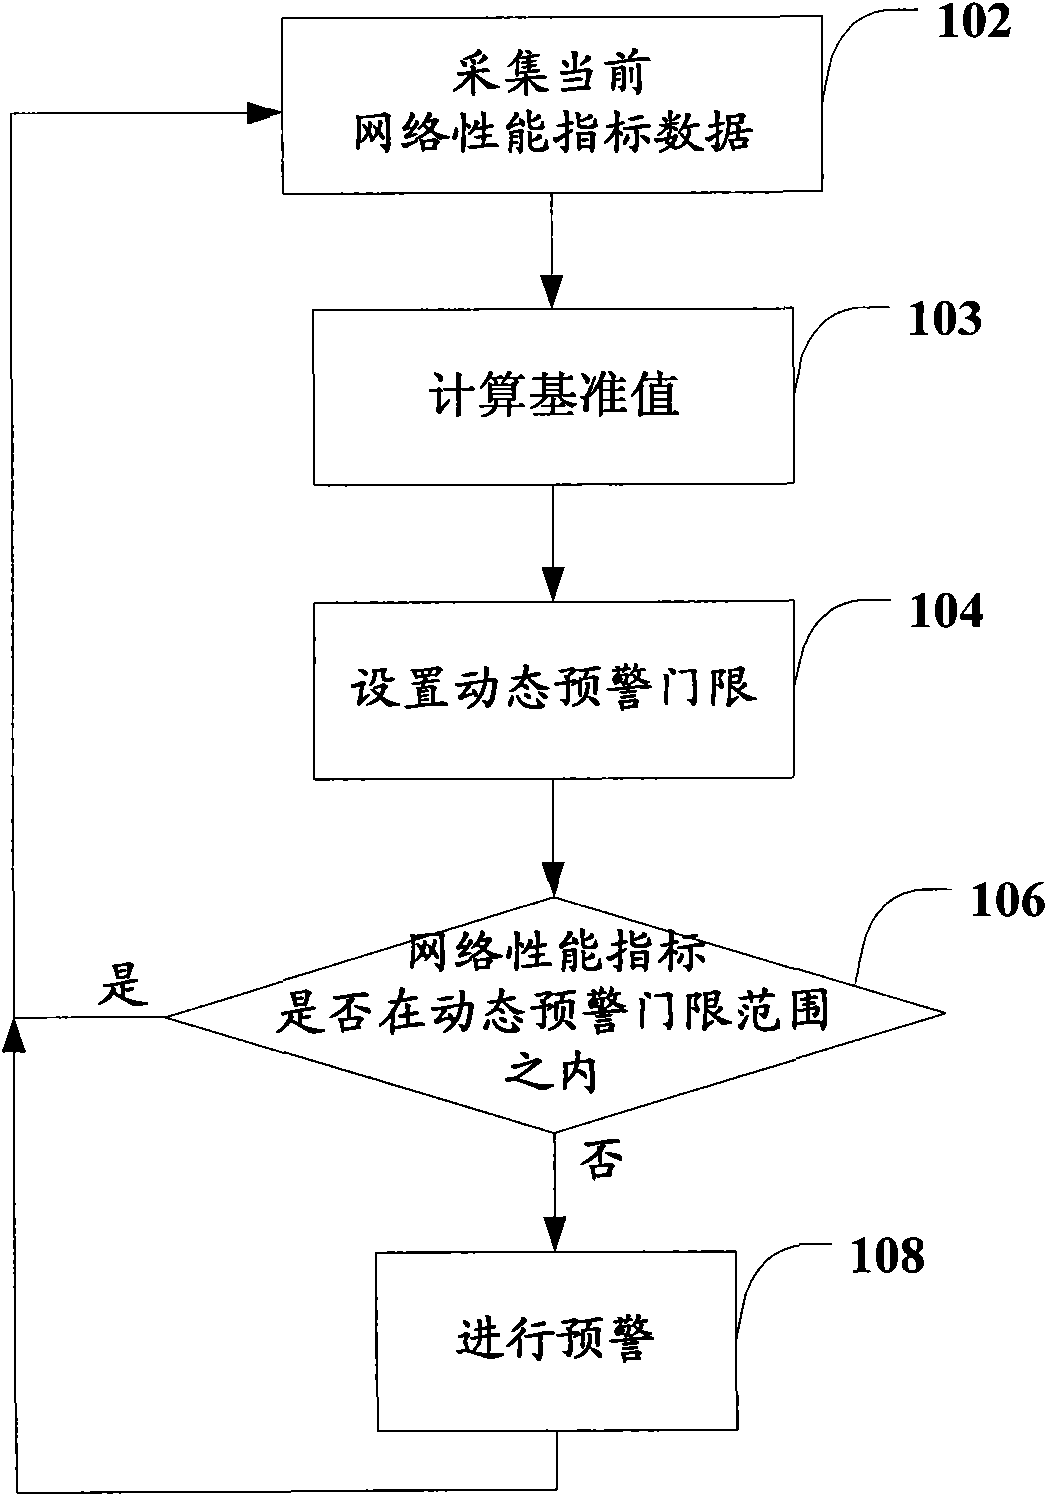 Method and device for carrying out early warning on network performance